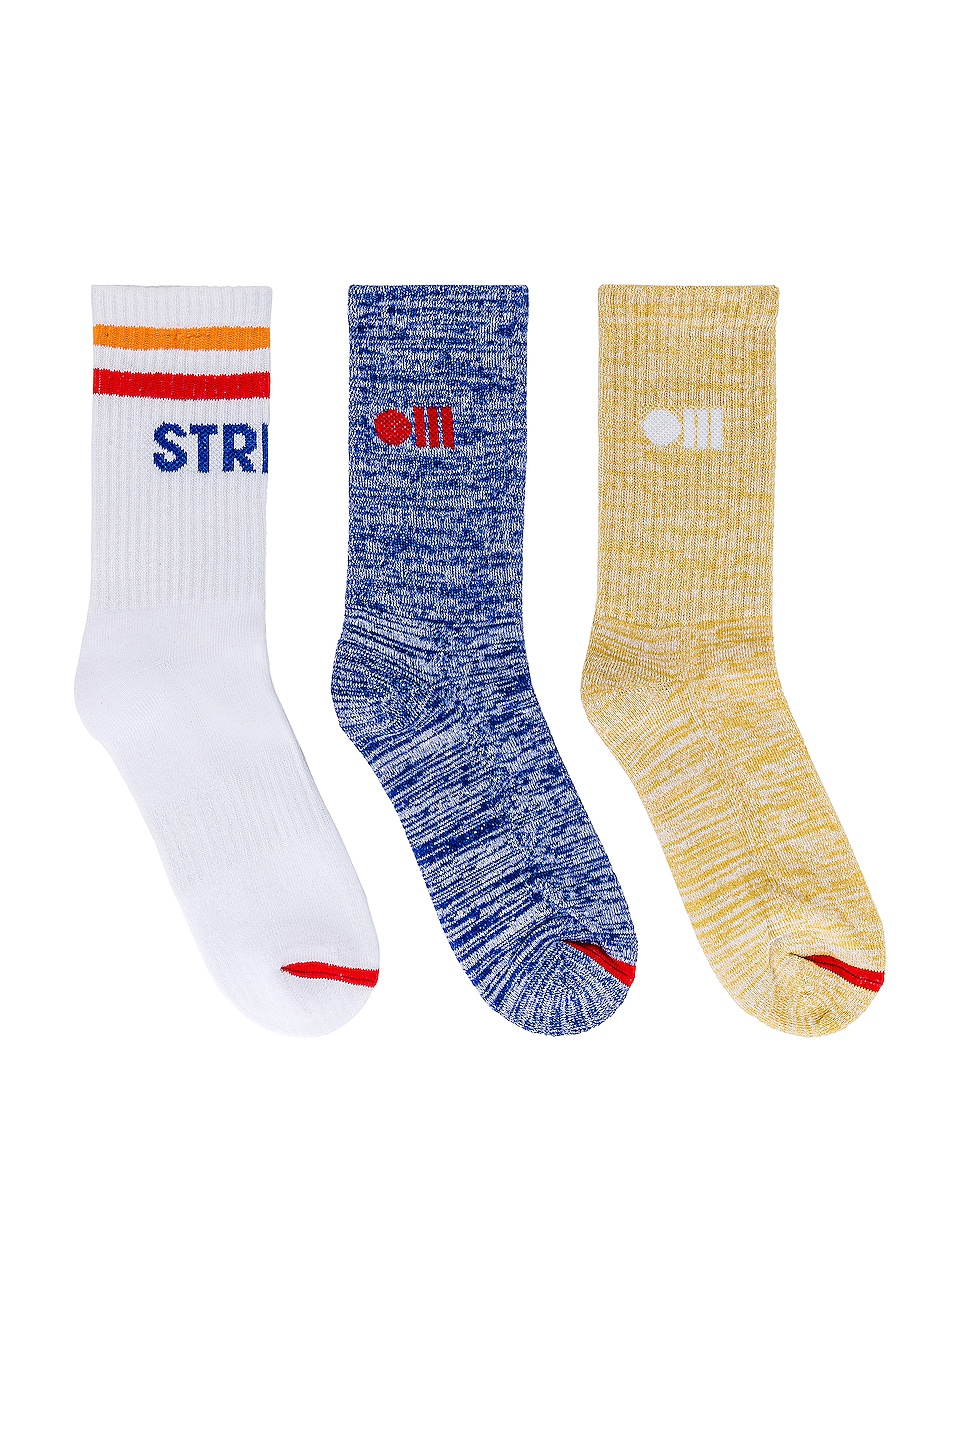 Solid & Striped The 3 Pack Crew Socks in Marshmallow, Marigold, Apple ...